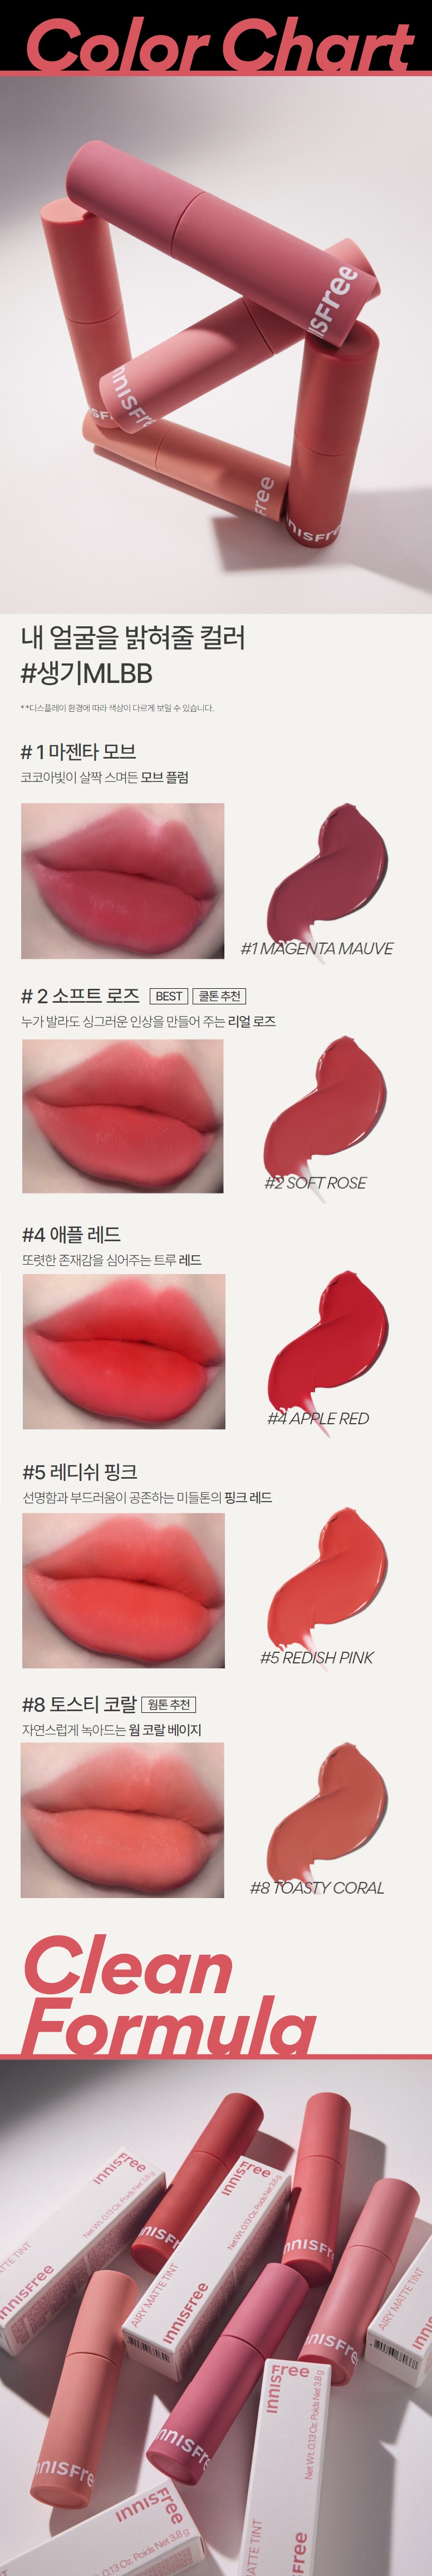 Innisfree Airy Matte Tint korean skincare product online shop malaysia china poland2